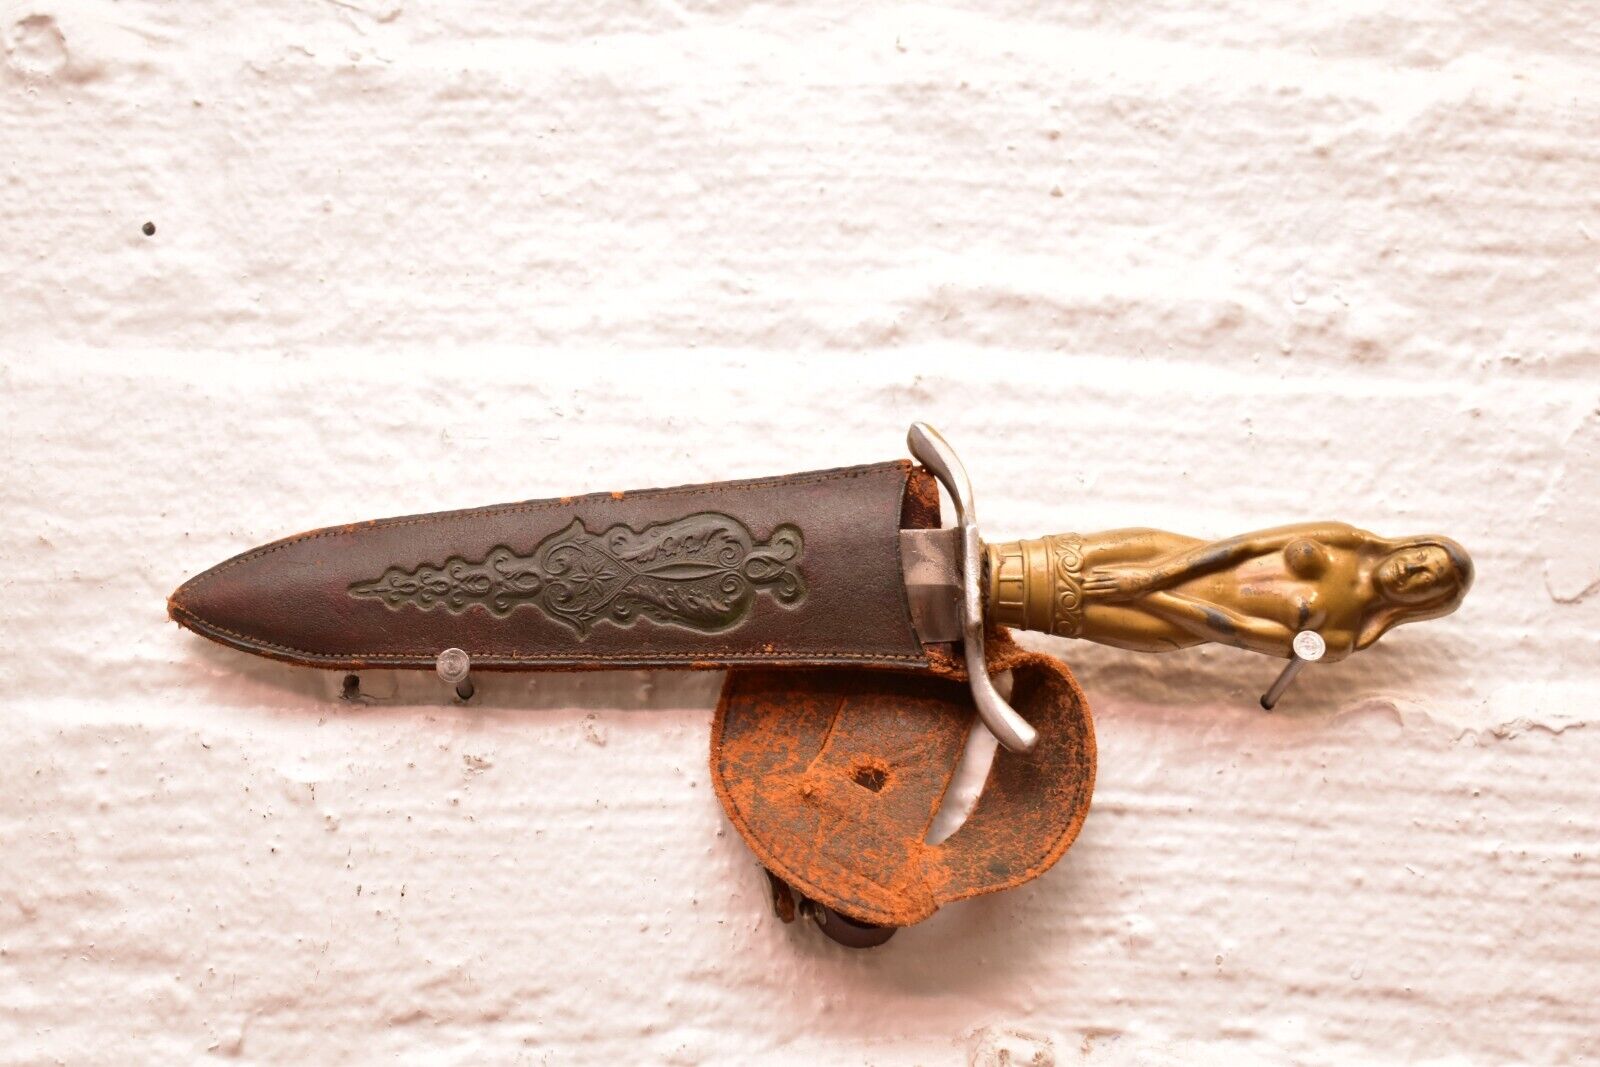 Vintage Korium 1950s “The Maiden” Nude Lady Dagger Knife With Leather Sheath